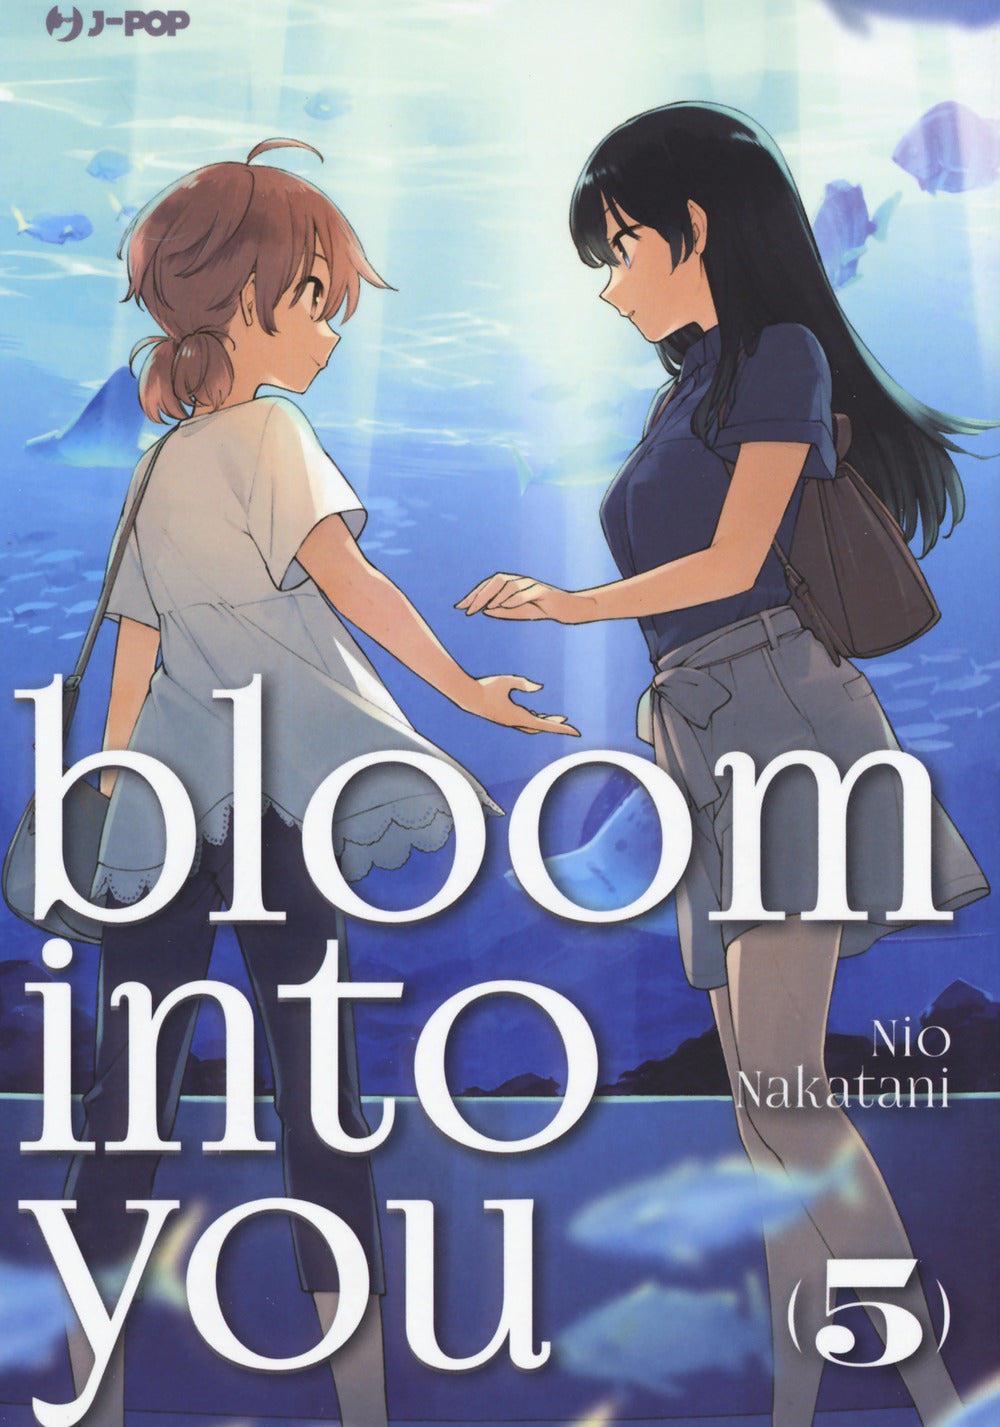 Bloom into you. Vol. 5.